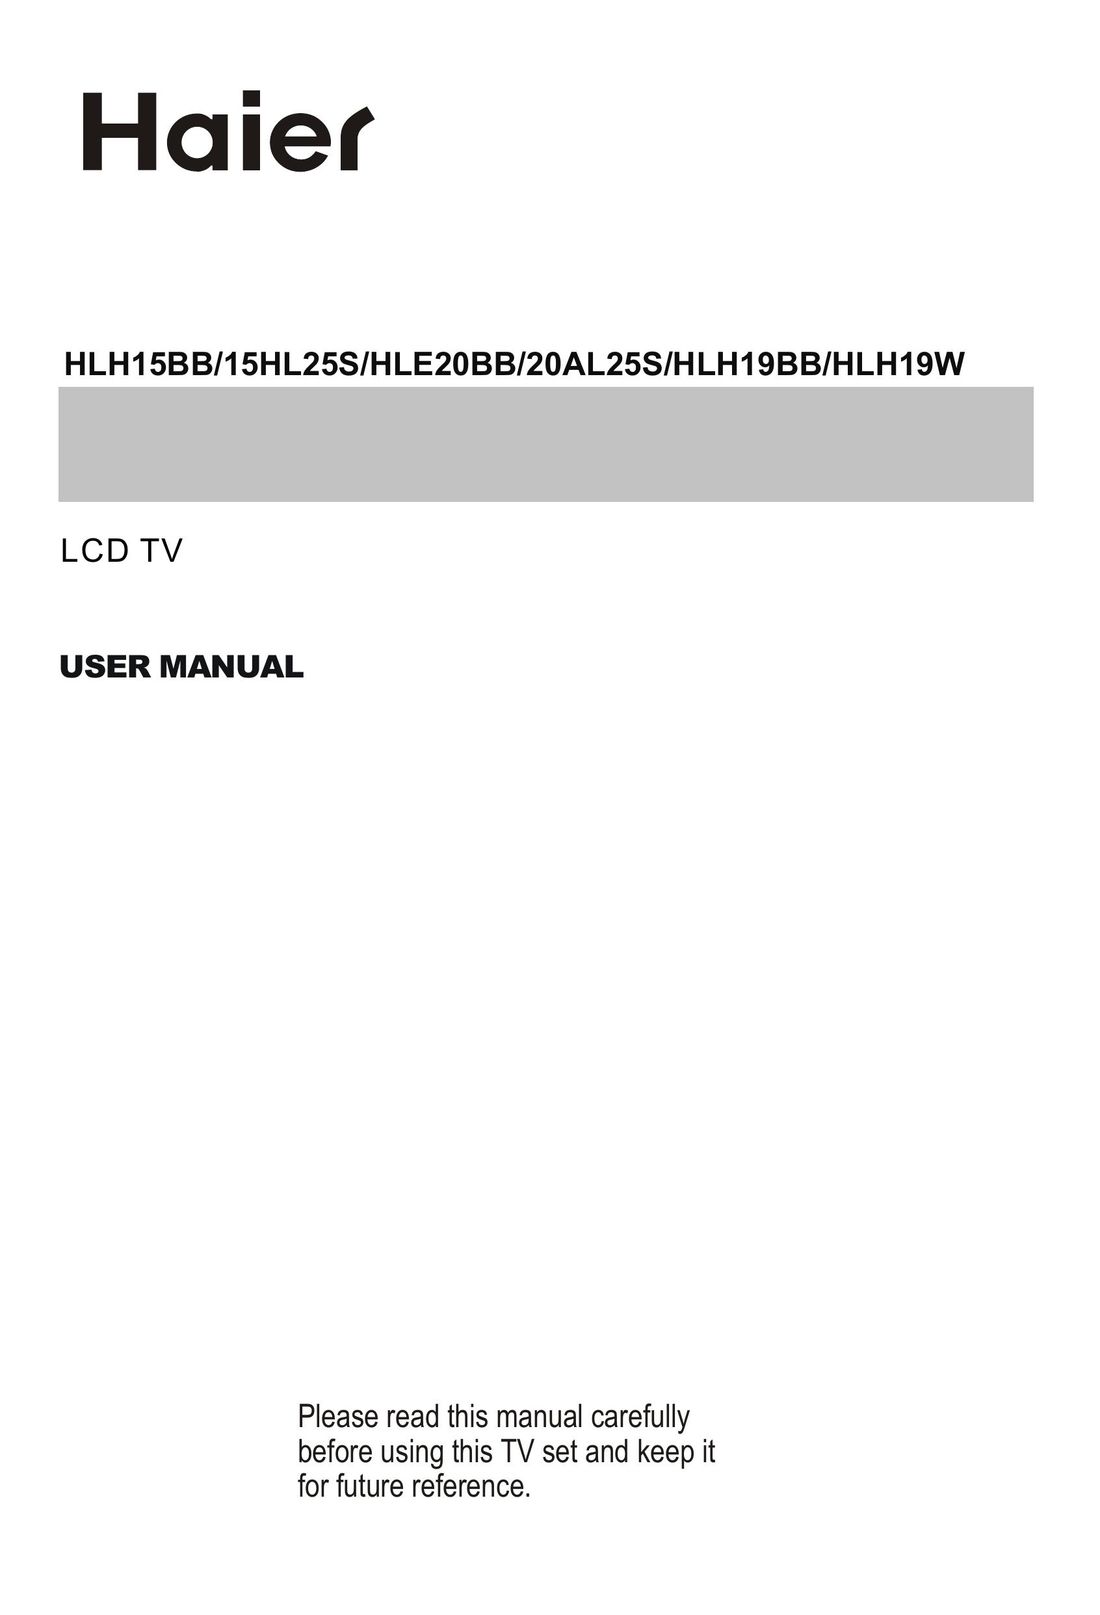 Haier 15HL25S Flat Panel Television User Manual